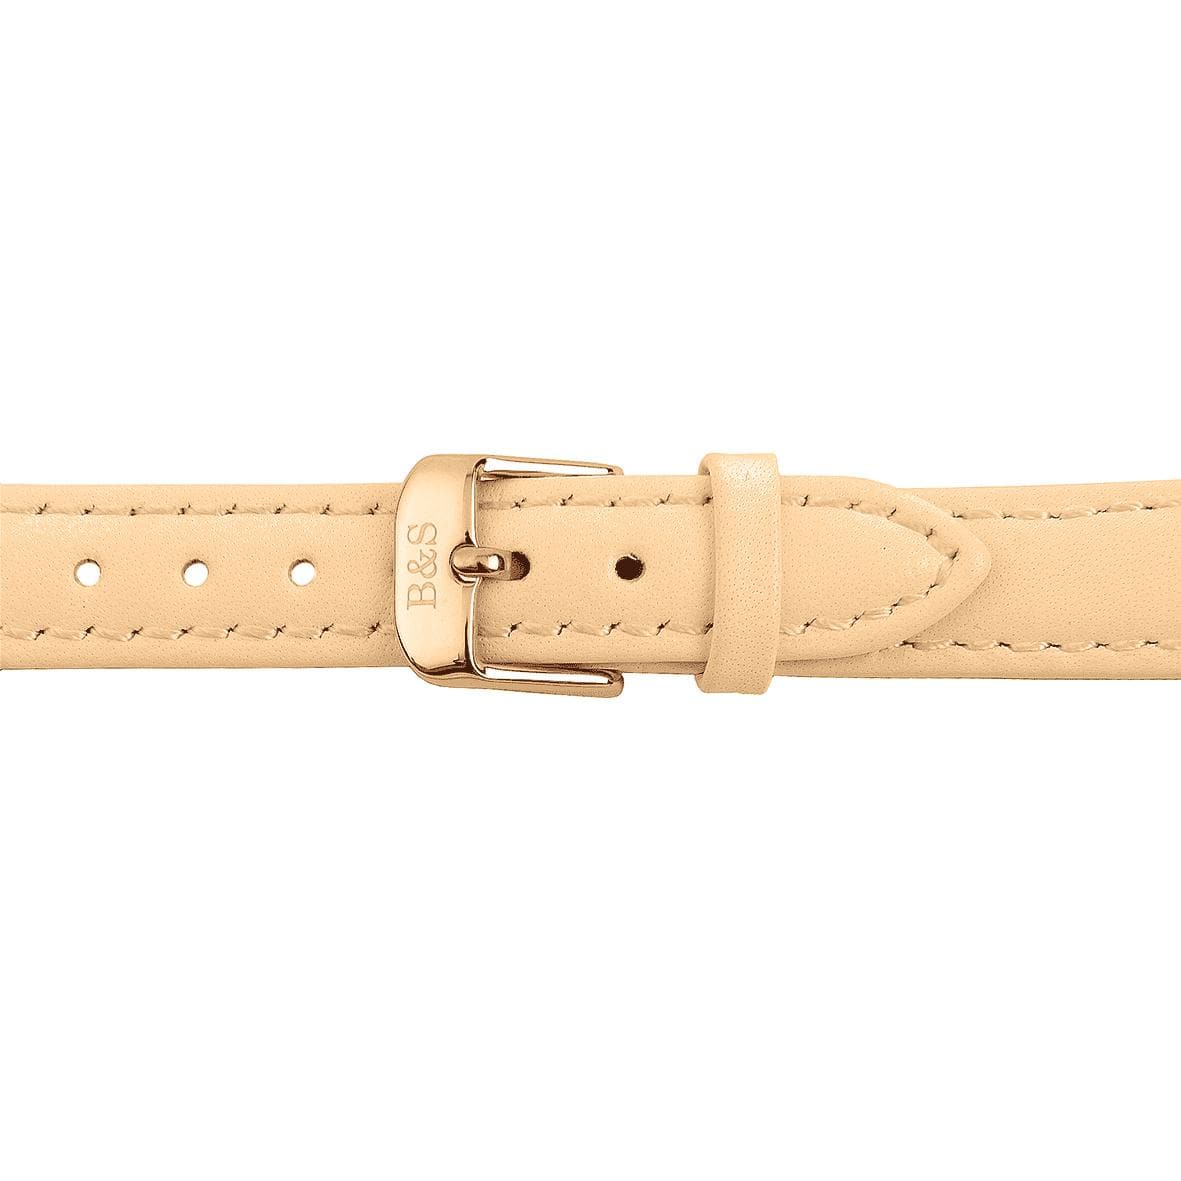 Cream Leather Strap & Rose Gold Buckle - Brother & Sisters